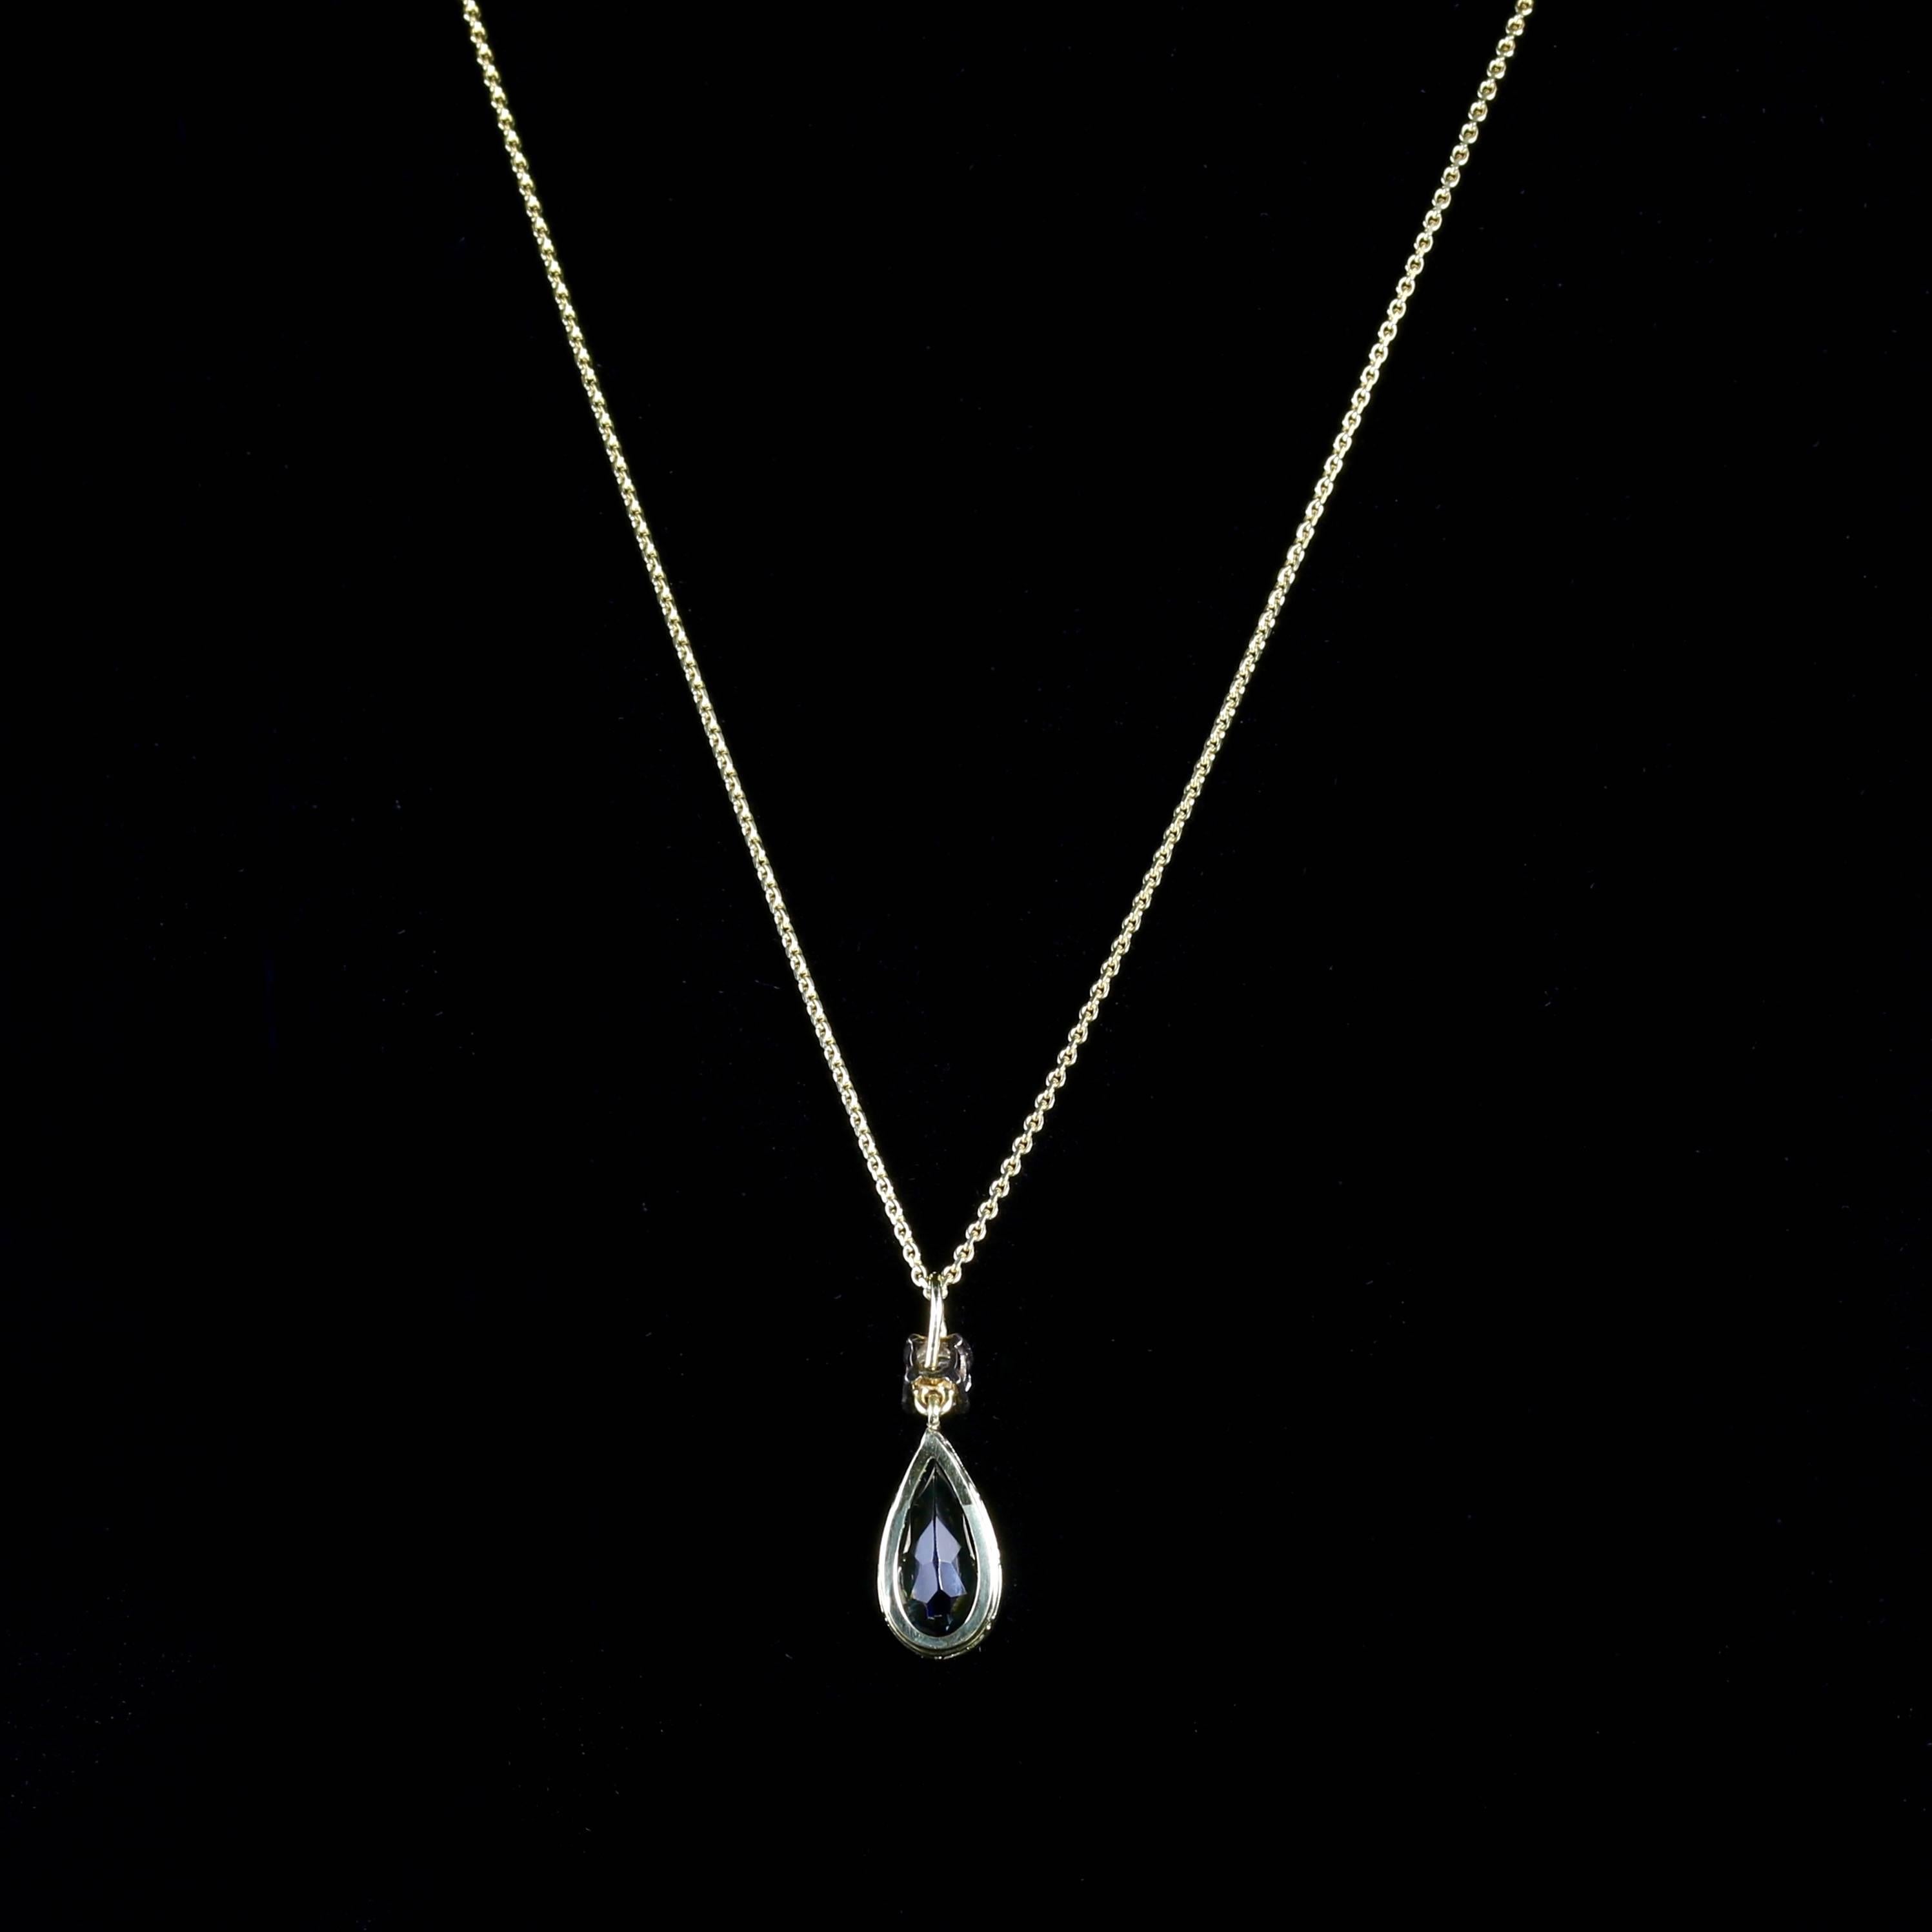 This fabulous Victorian 18ct Yellow Gold pendant boasts a 3.5ct deep Blue natural Aquamarine that is a collet set.

A beautiful old cut Diamond is set at the top of the pendant, which is approx 0.40ct.

The Diamond has superb clarity and is SI 1 H/I